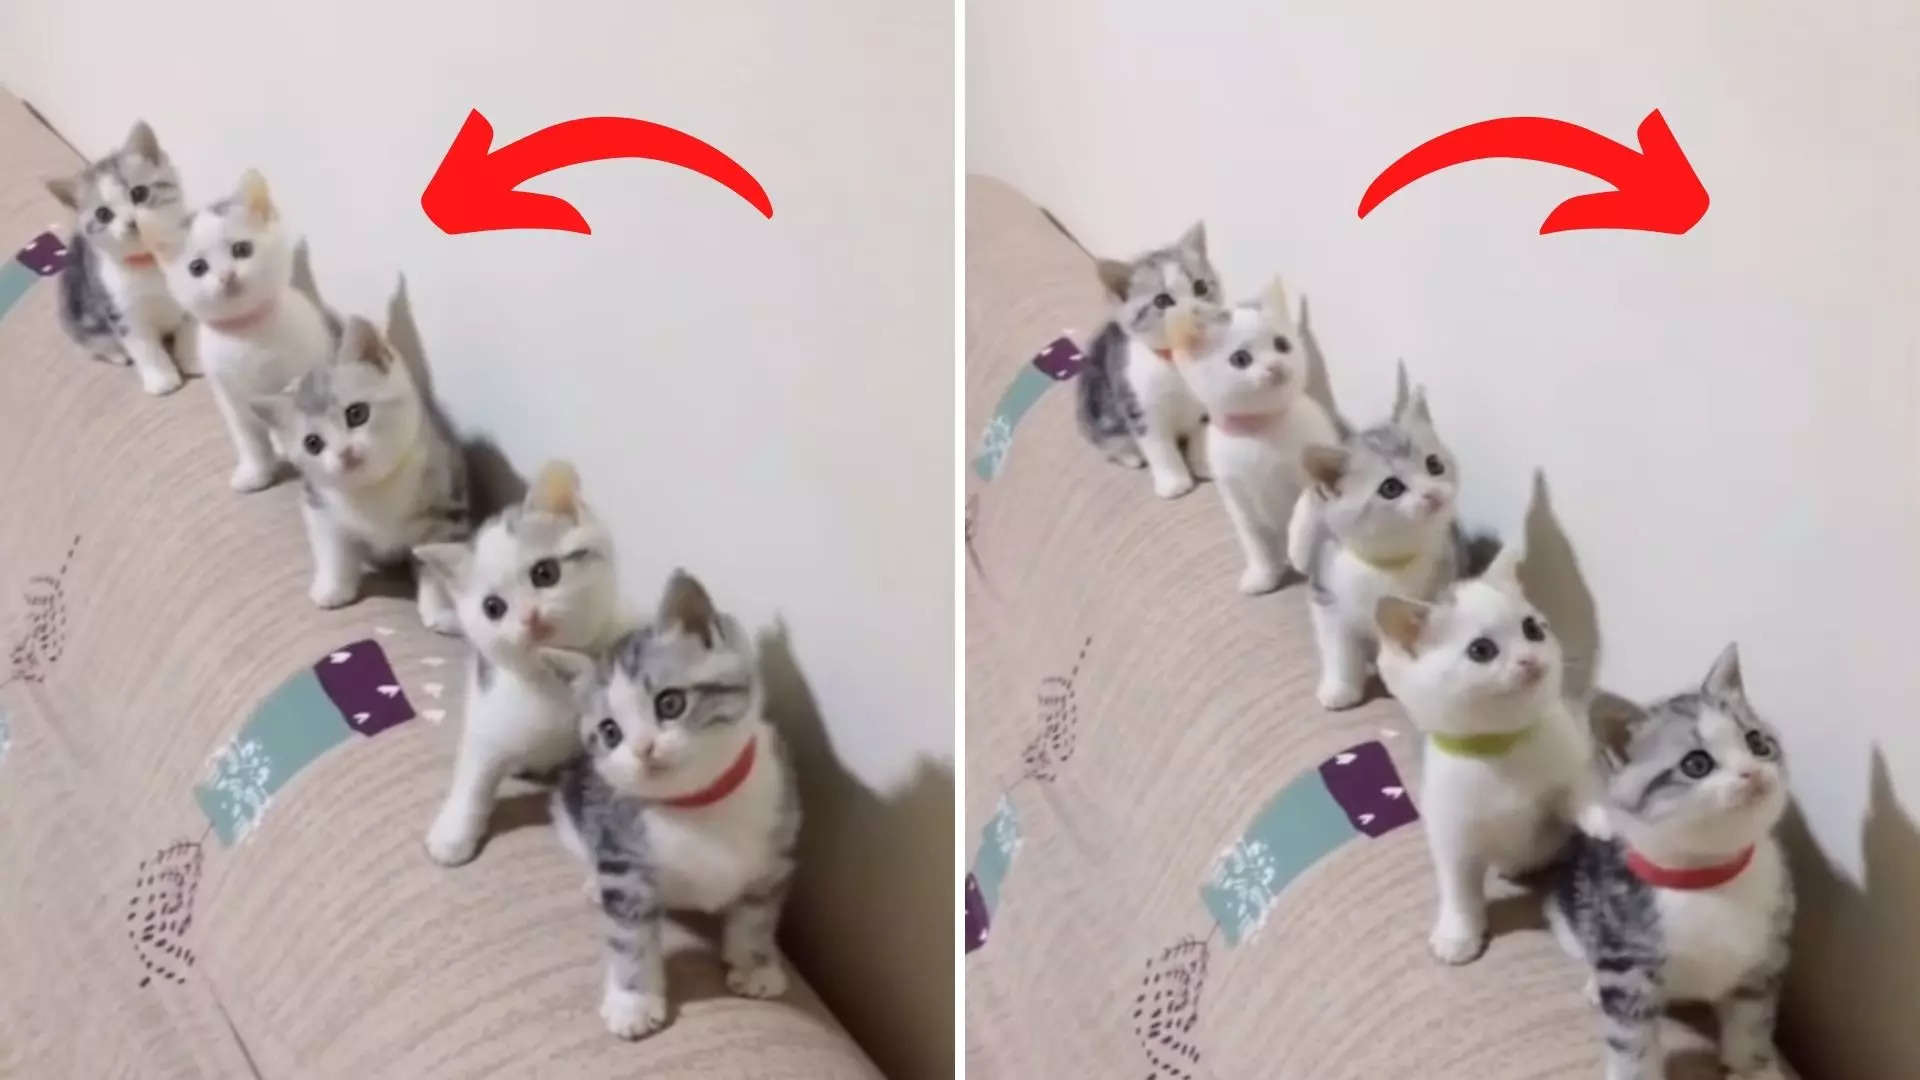 Five kittens sync dance moves in a viral video posted on Instagram